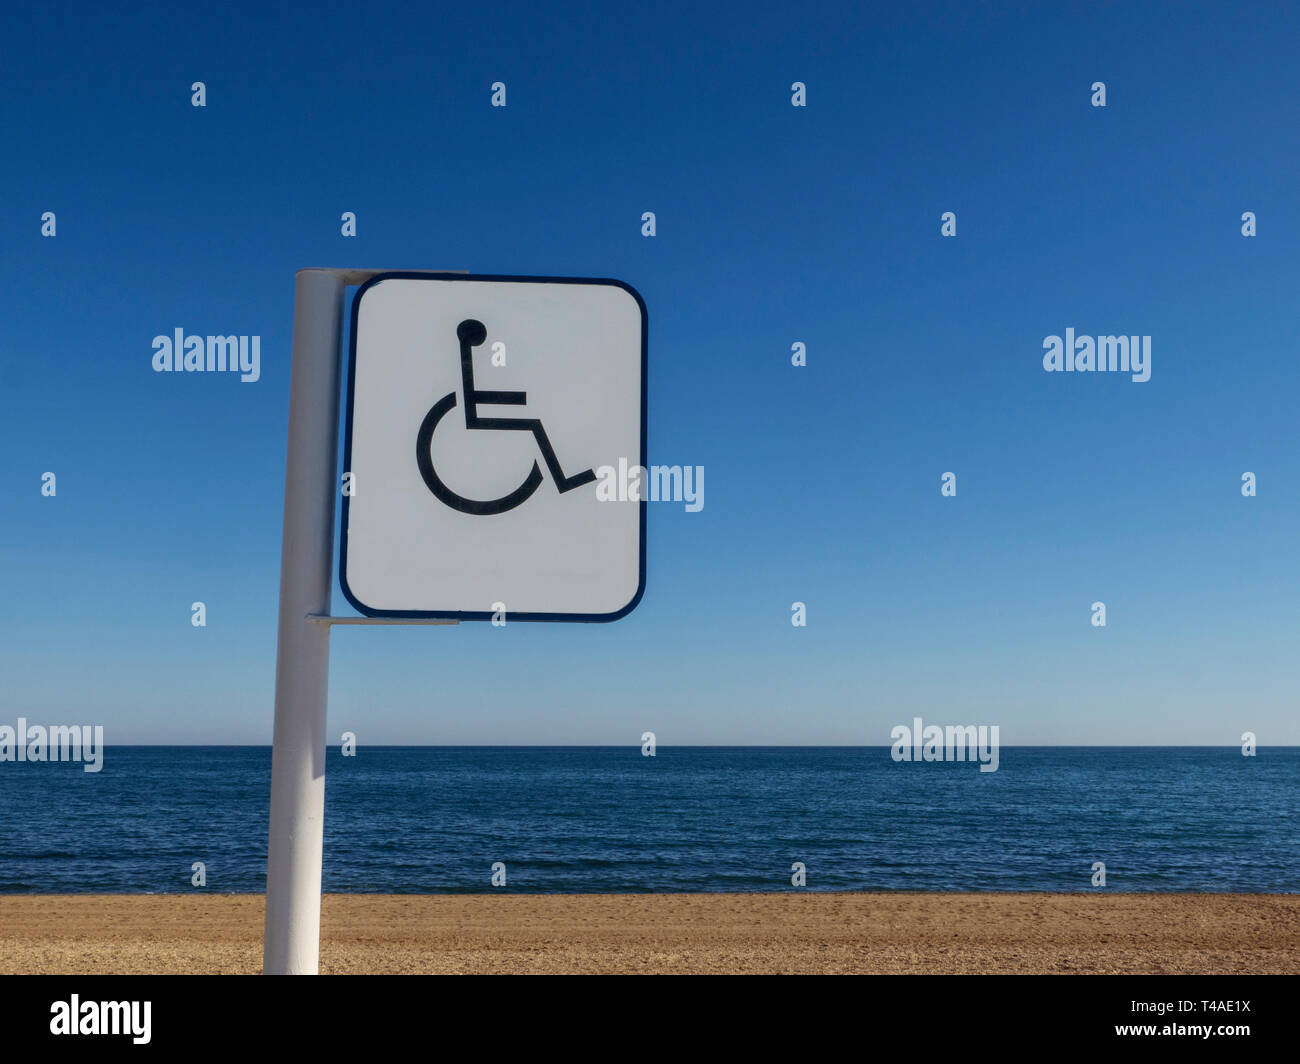 Disabled symbol showing internationally recognised sign for access and disabled facilities to beach and sea Marbella Costa Del Sol Andalusia Spain EU Stock Photo